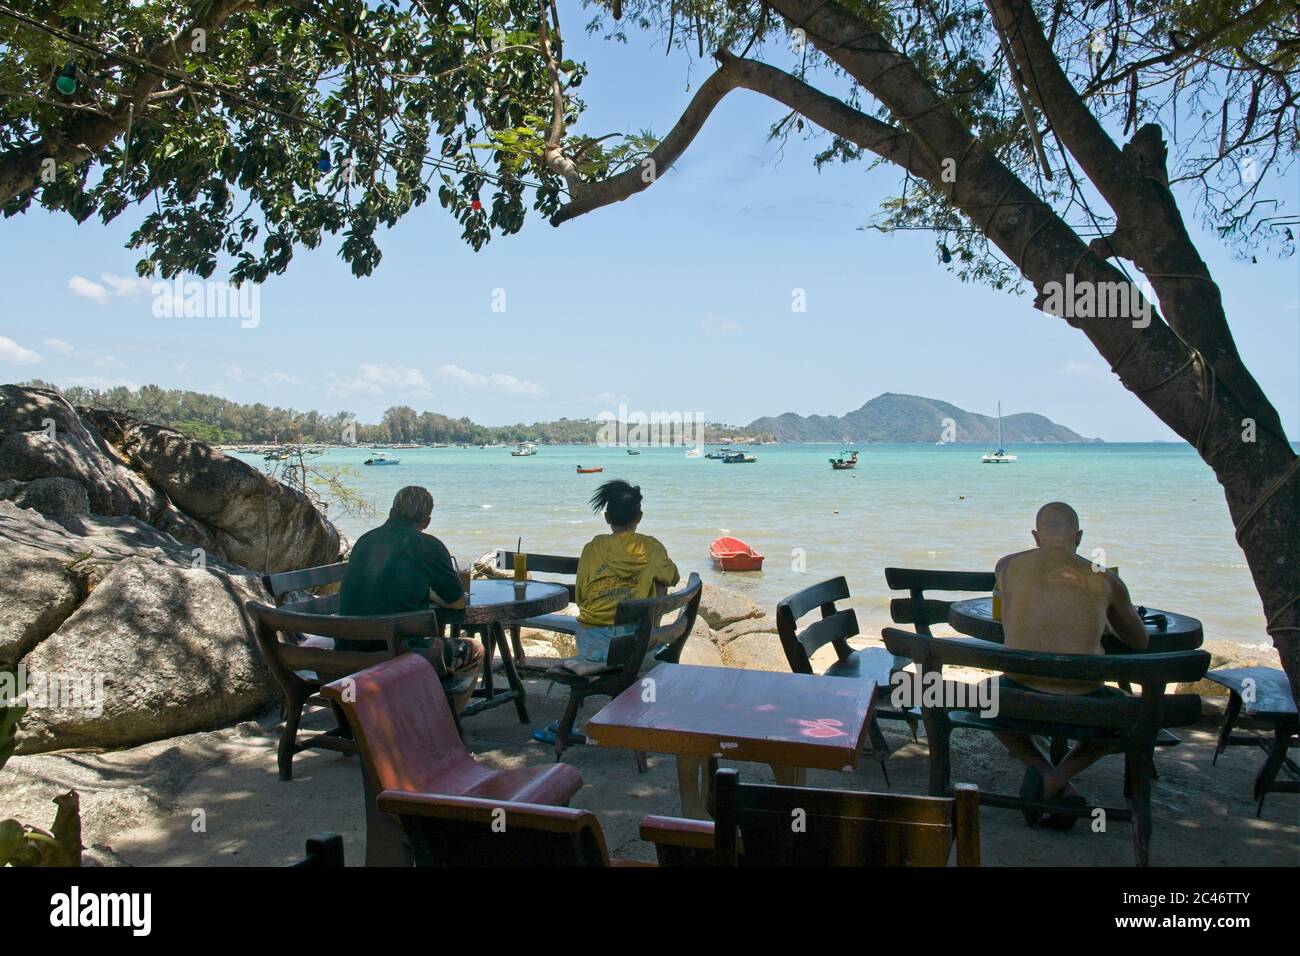 Secluded bar & boats on sandy beach people seated al-fresco framed by tree branch leaves and trunk looking out to sea blue sky turquoise sea Landscape Stock Photo